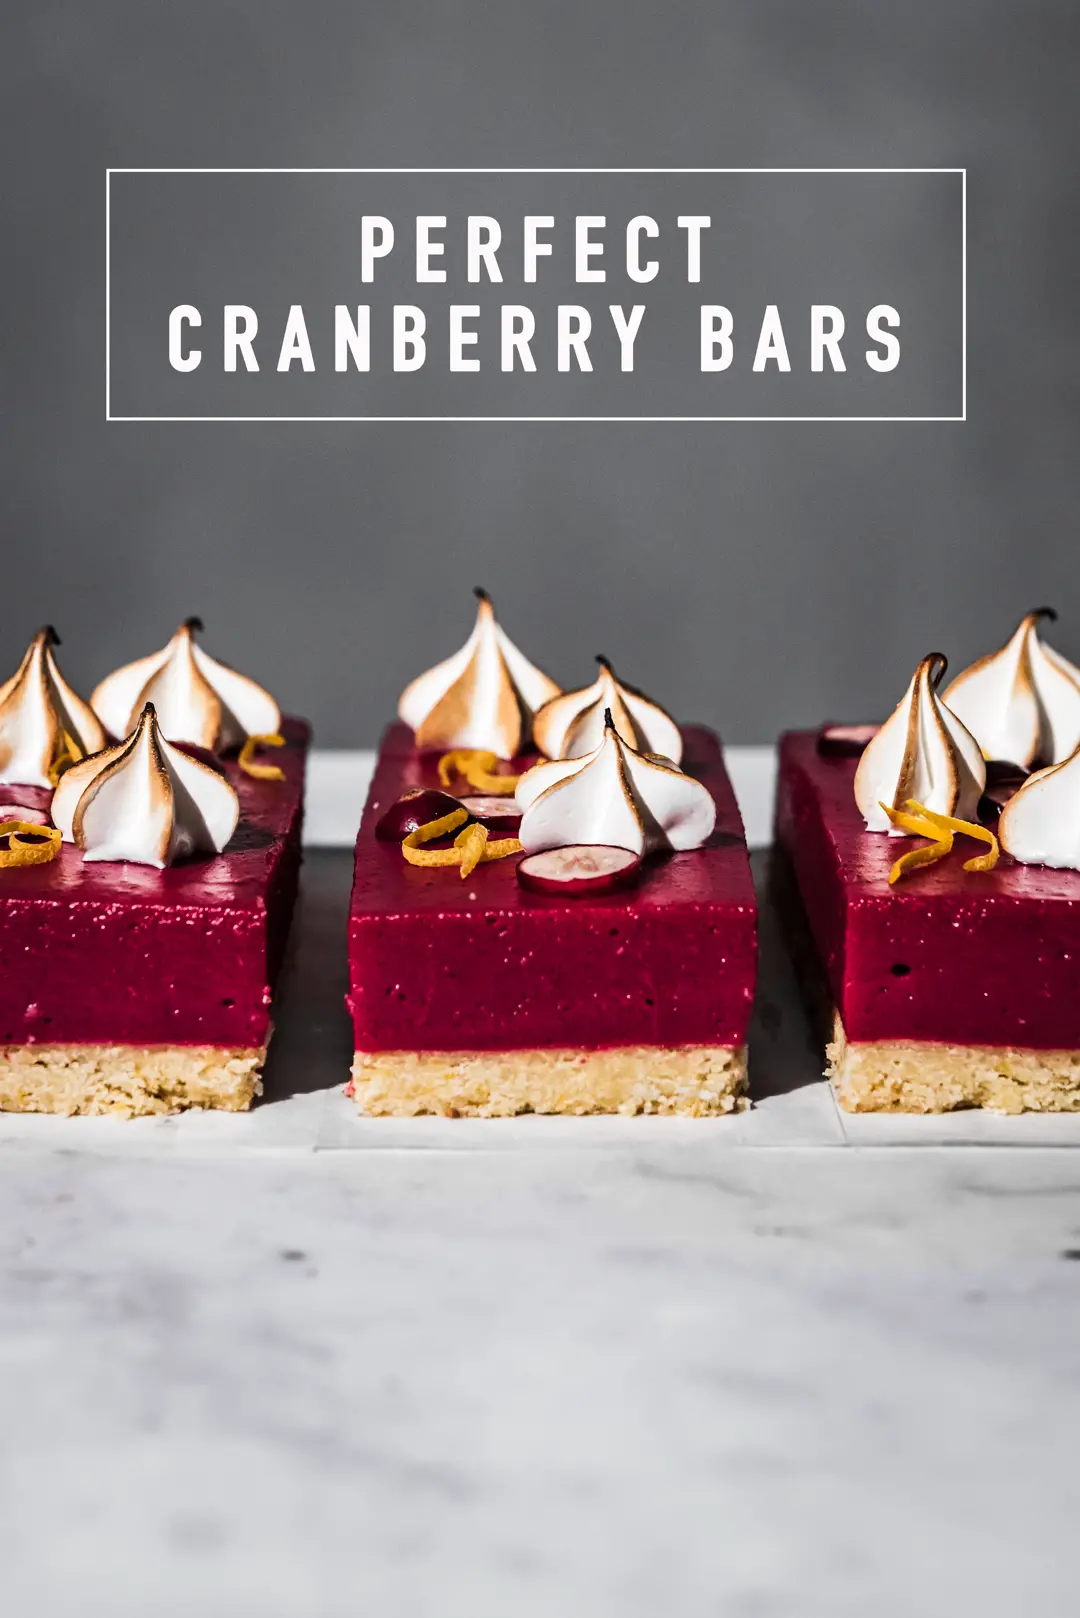 If you are a lemon bar fan, then you will love this cranberry version! These perfect cranberry bars are a simply beautiful addition to your holiday baking!